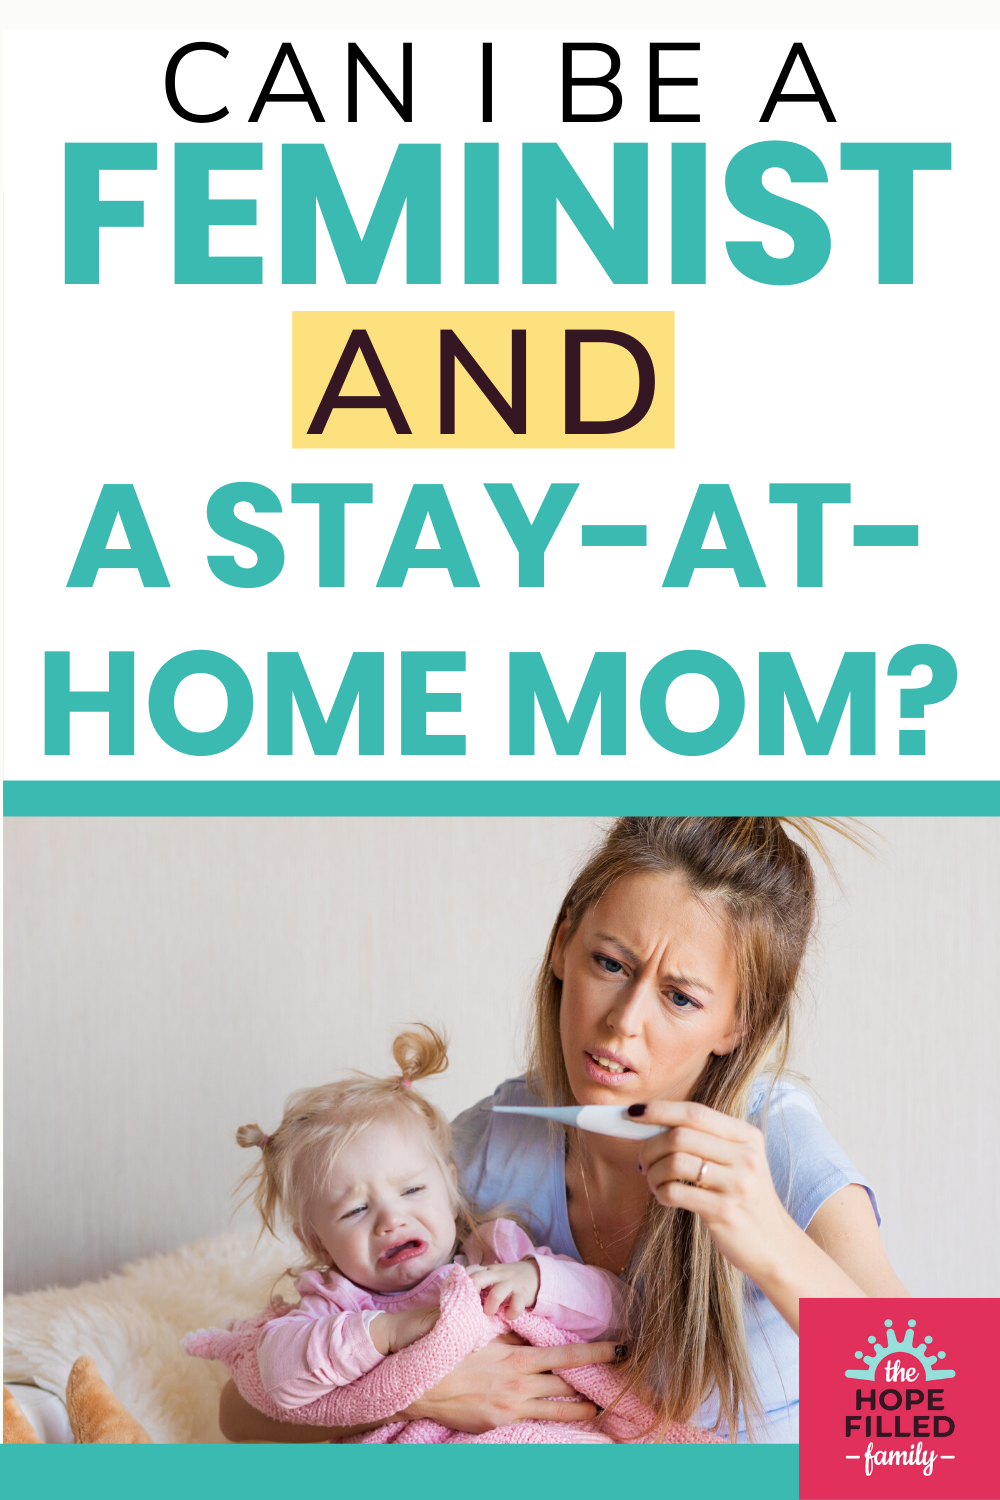 Can I be a feminist and a stay-at-home mom?